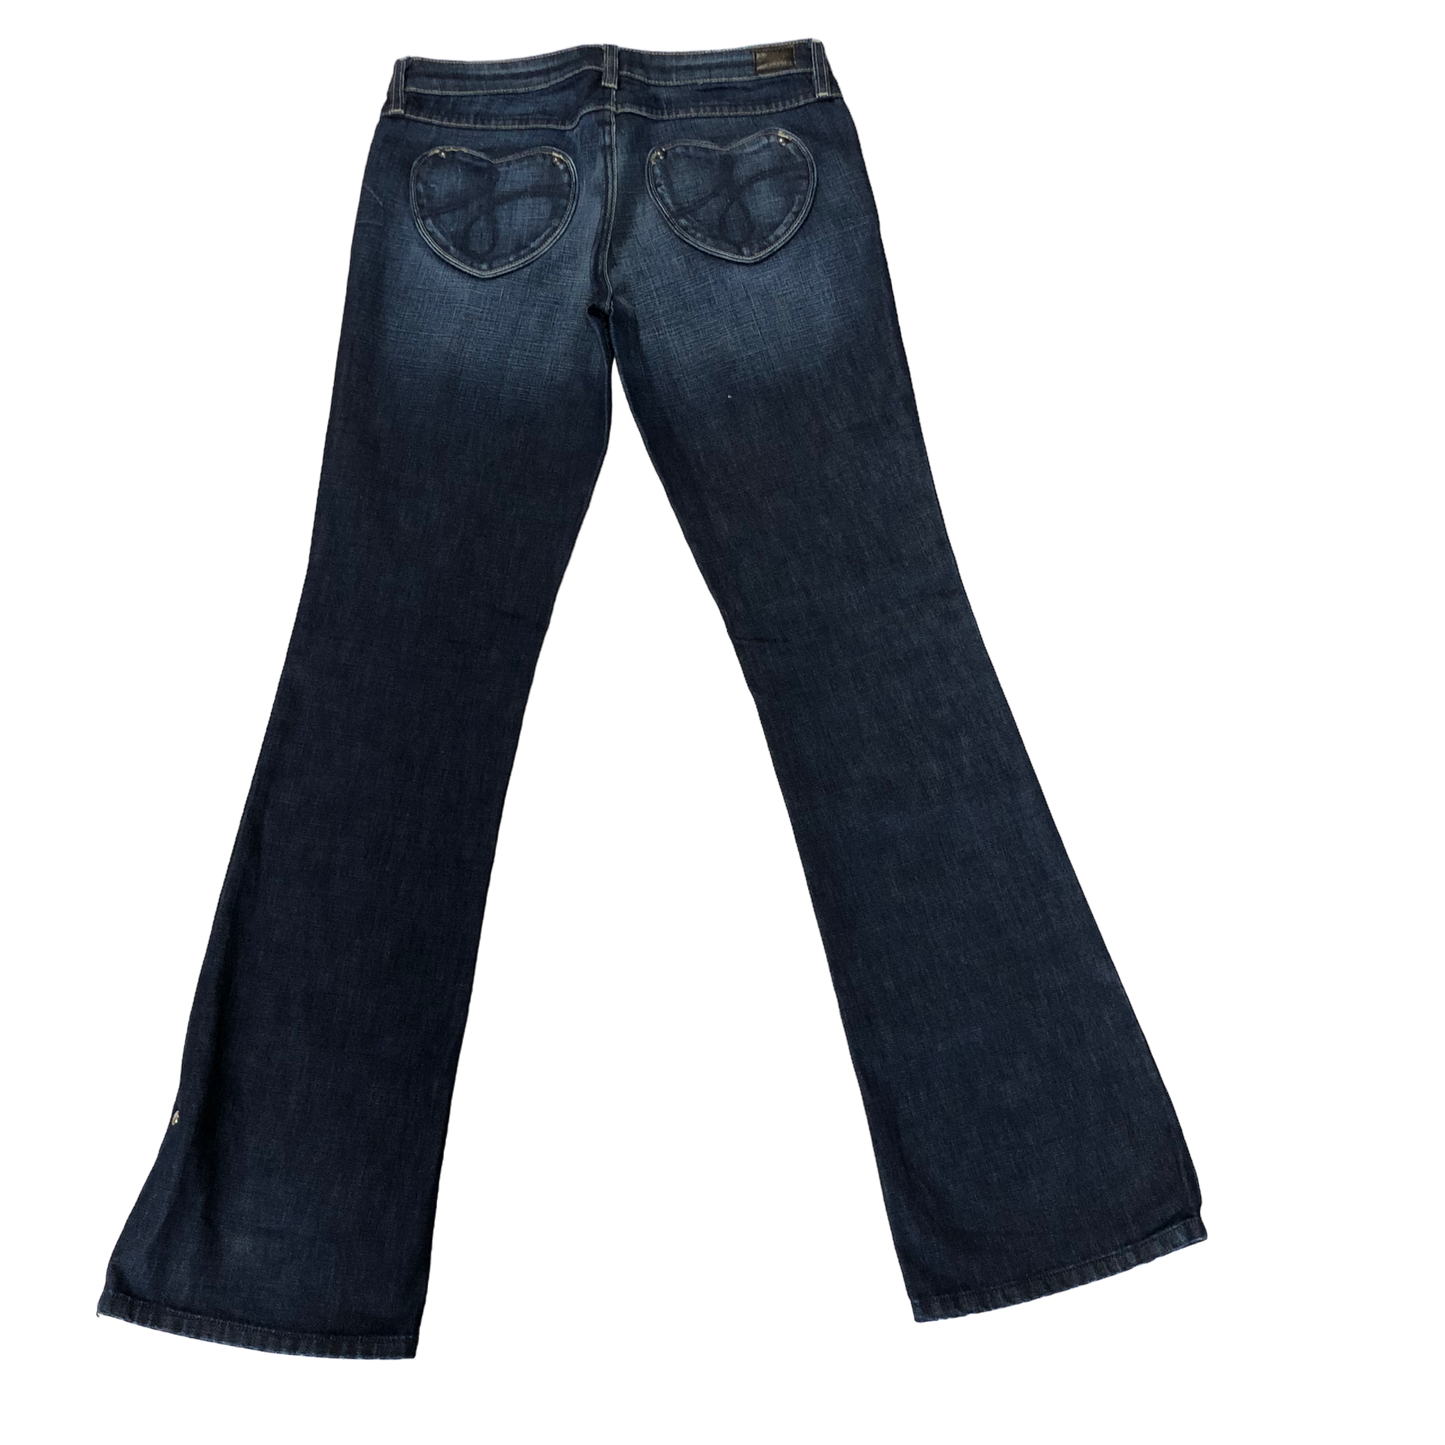 Jeans Boot Cut By Juicy Couture  Size: 8